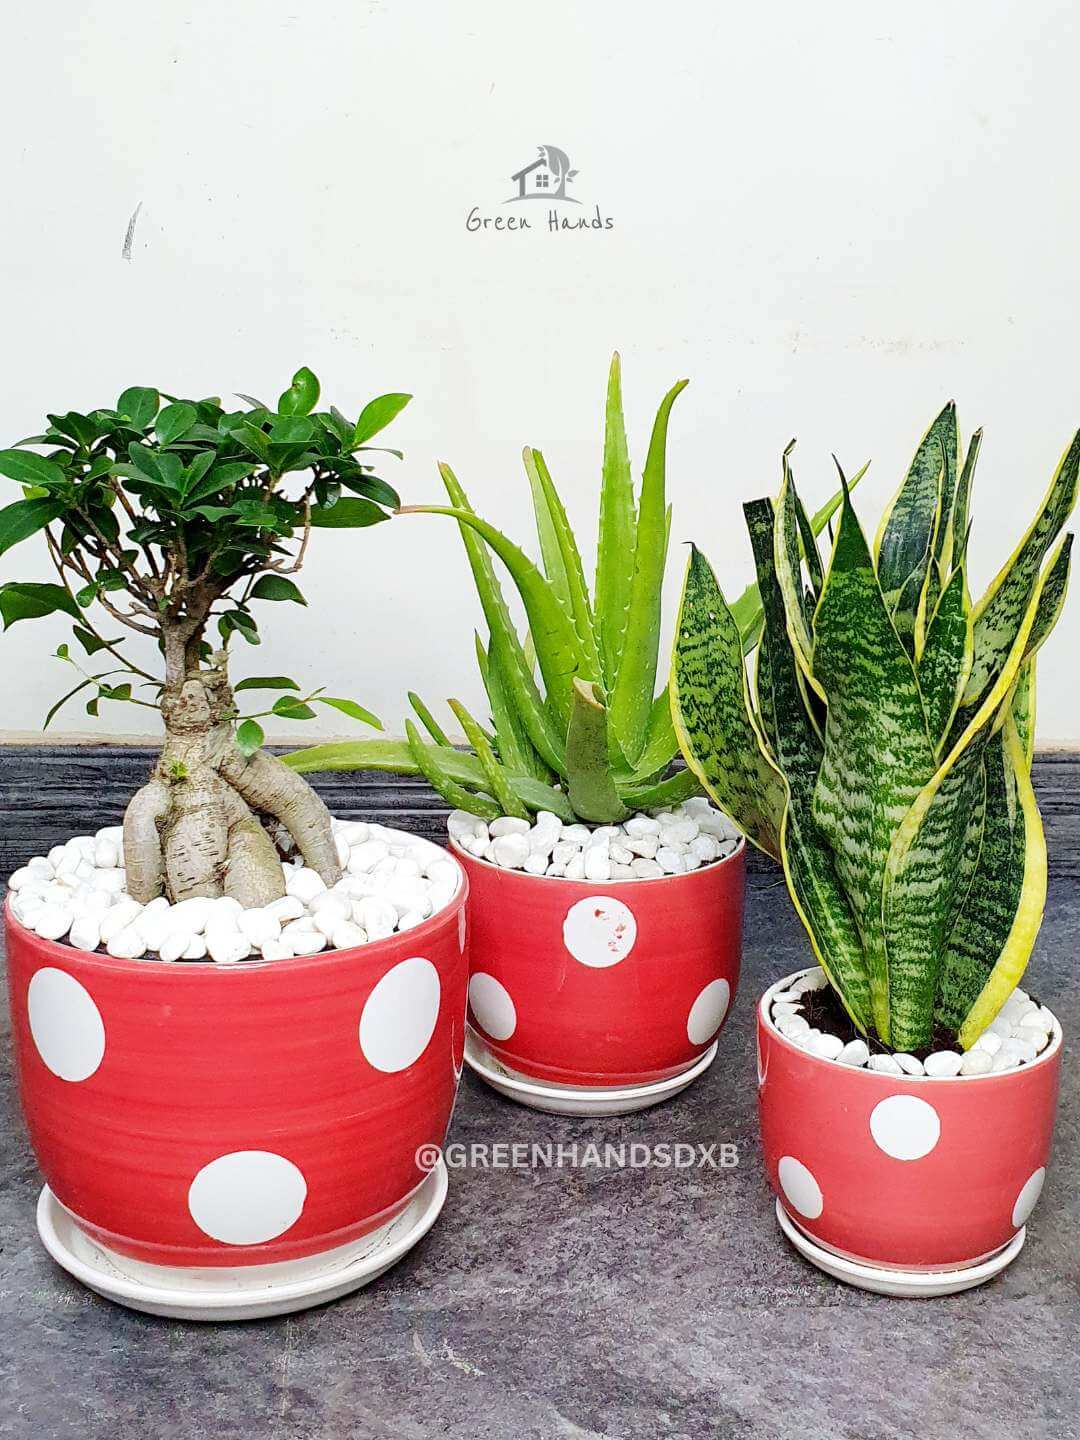 Potted Aloe Vera, Snake Plant and Bonsai Bundle Planted in Yellow Pot